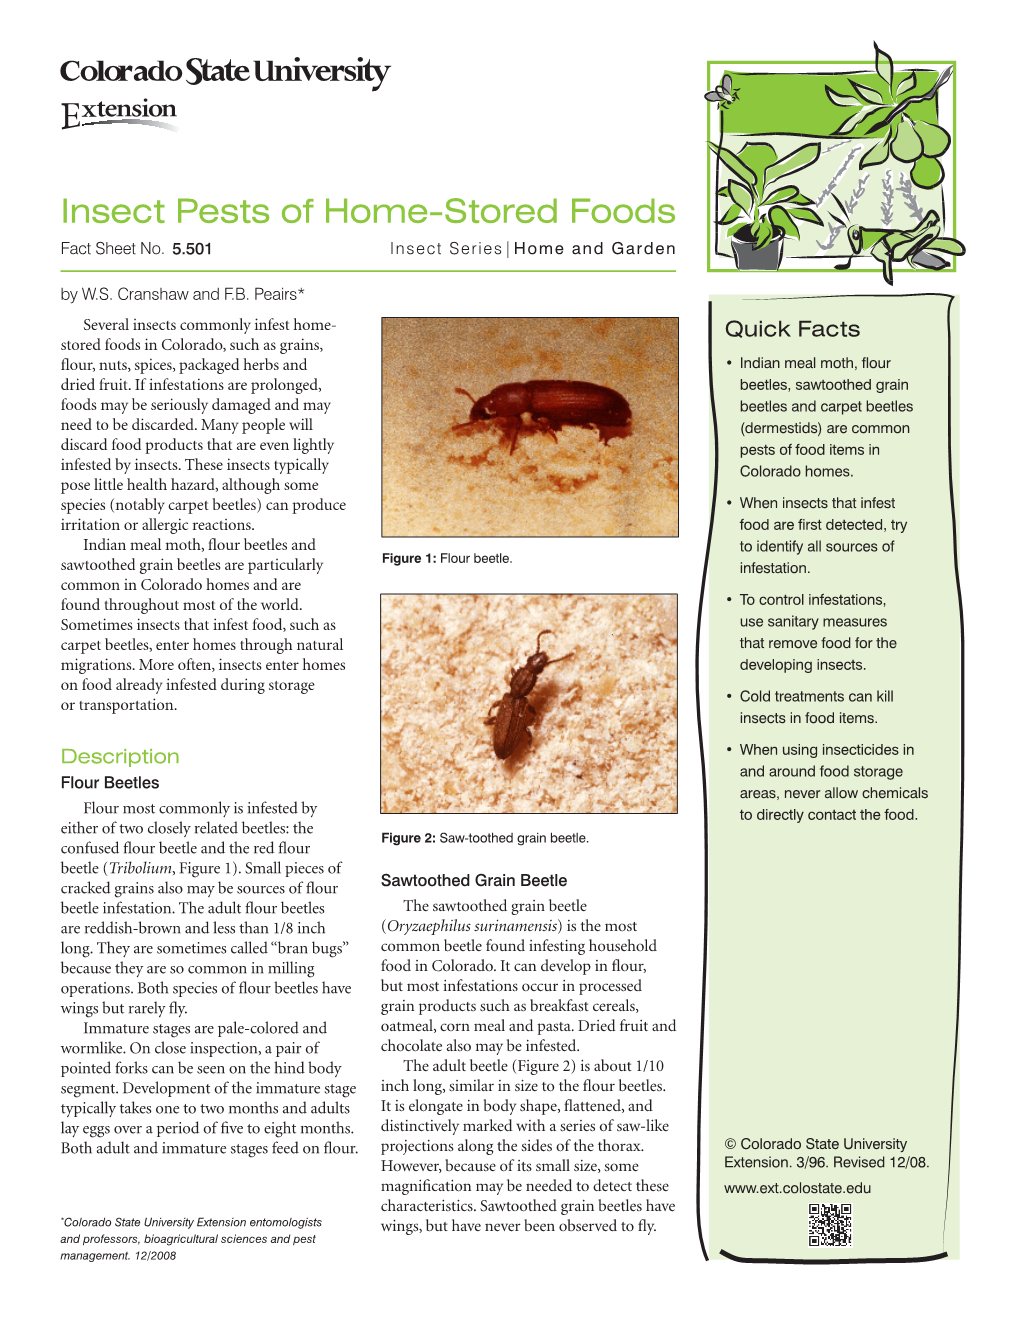 Insect Pests of Home-Stored Foods Fact Sheet No